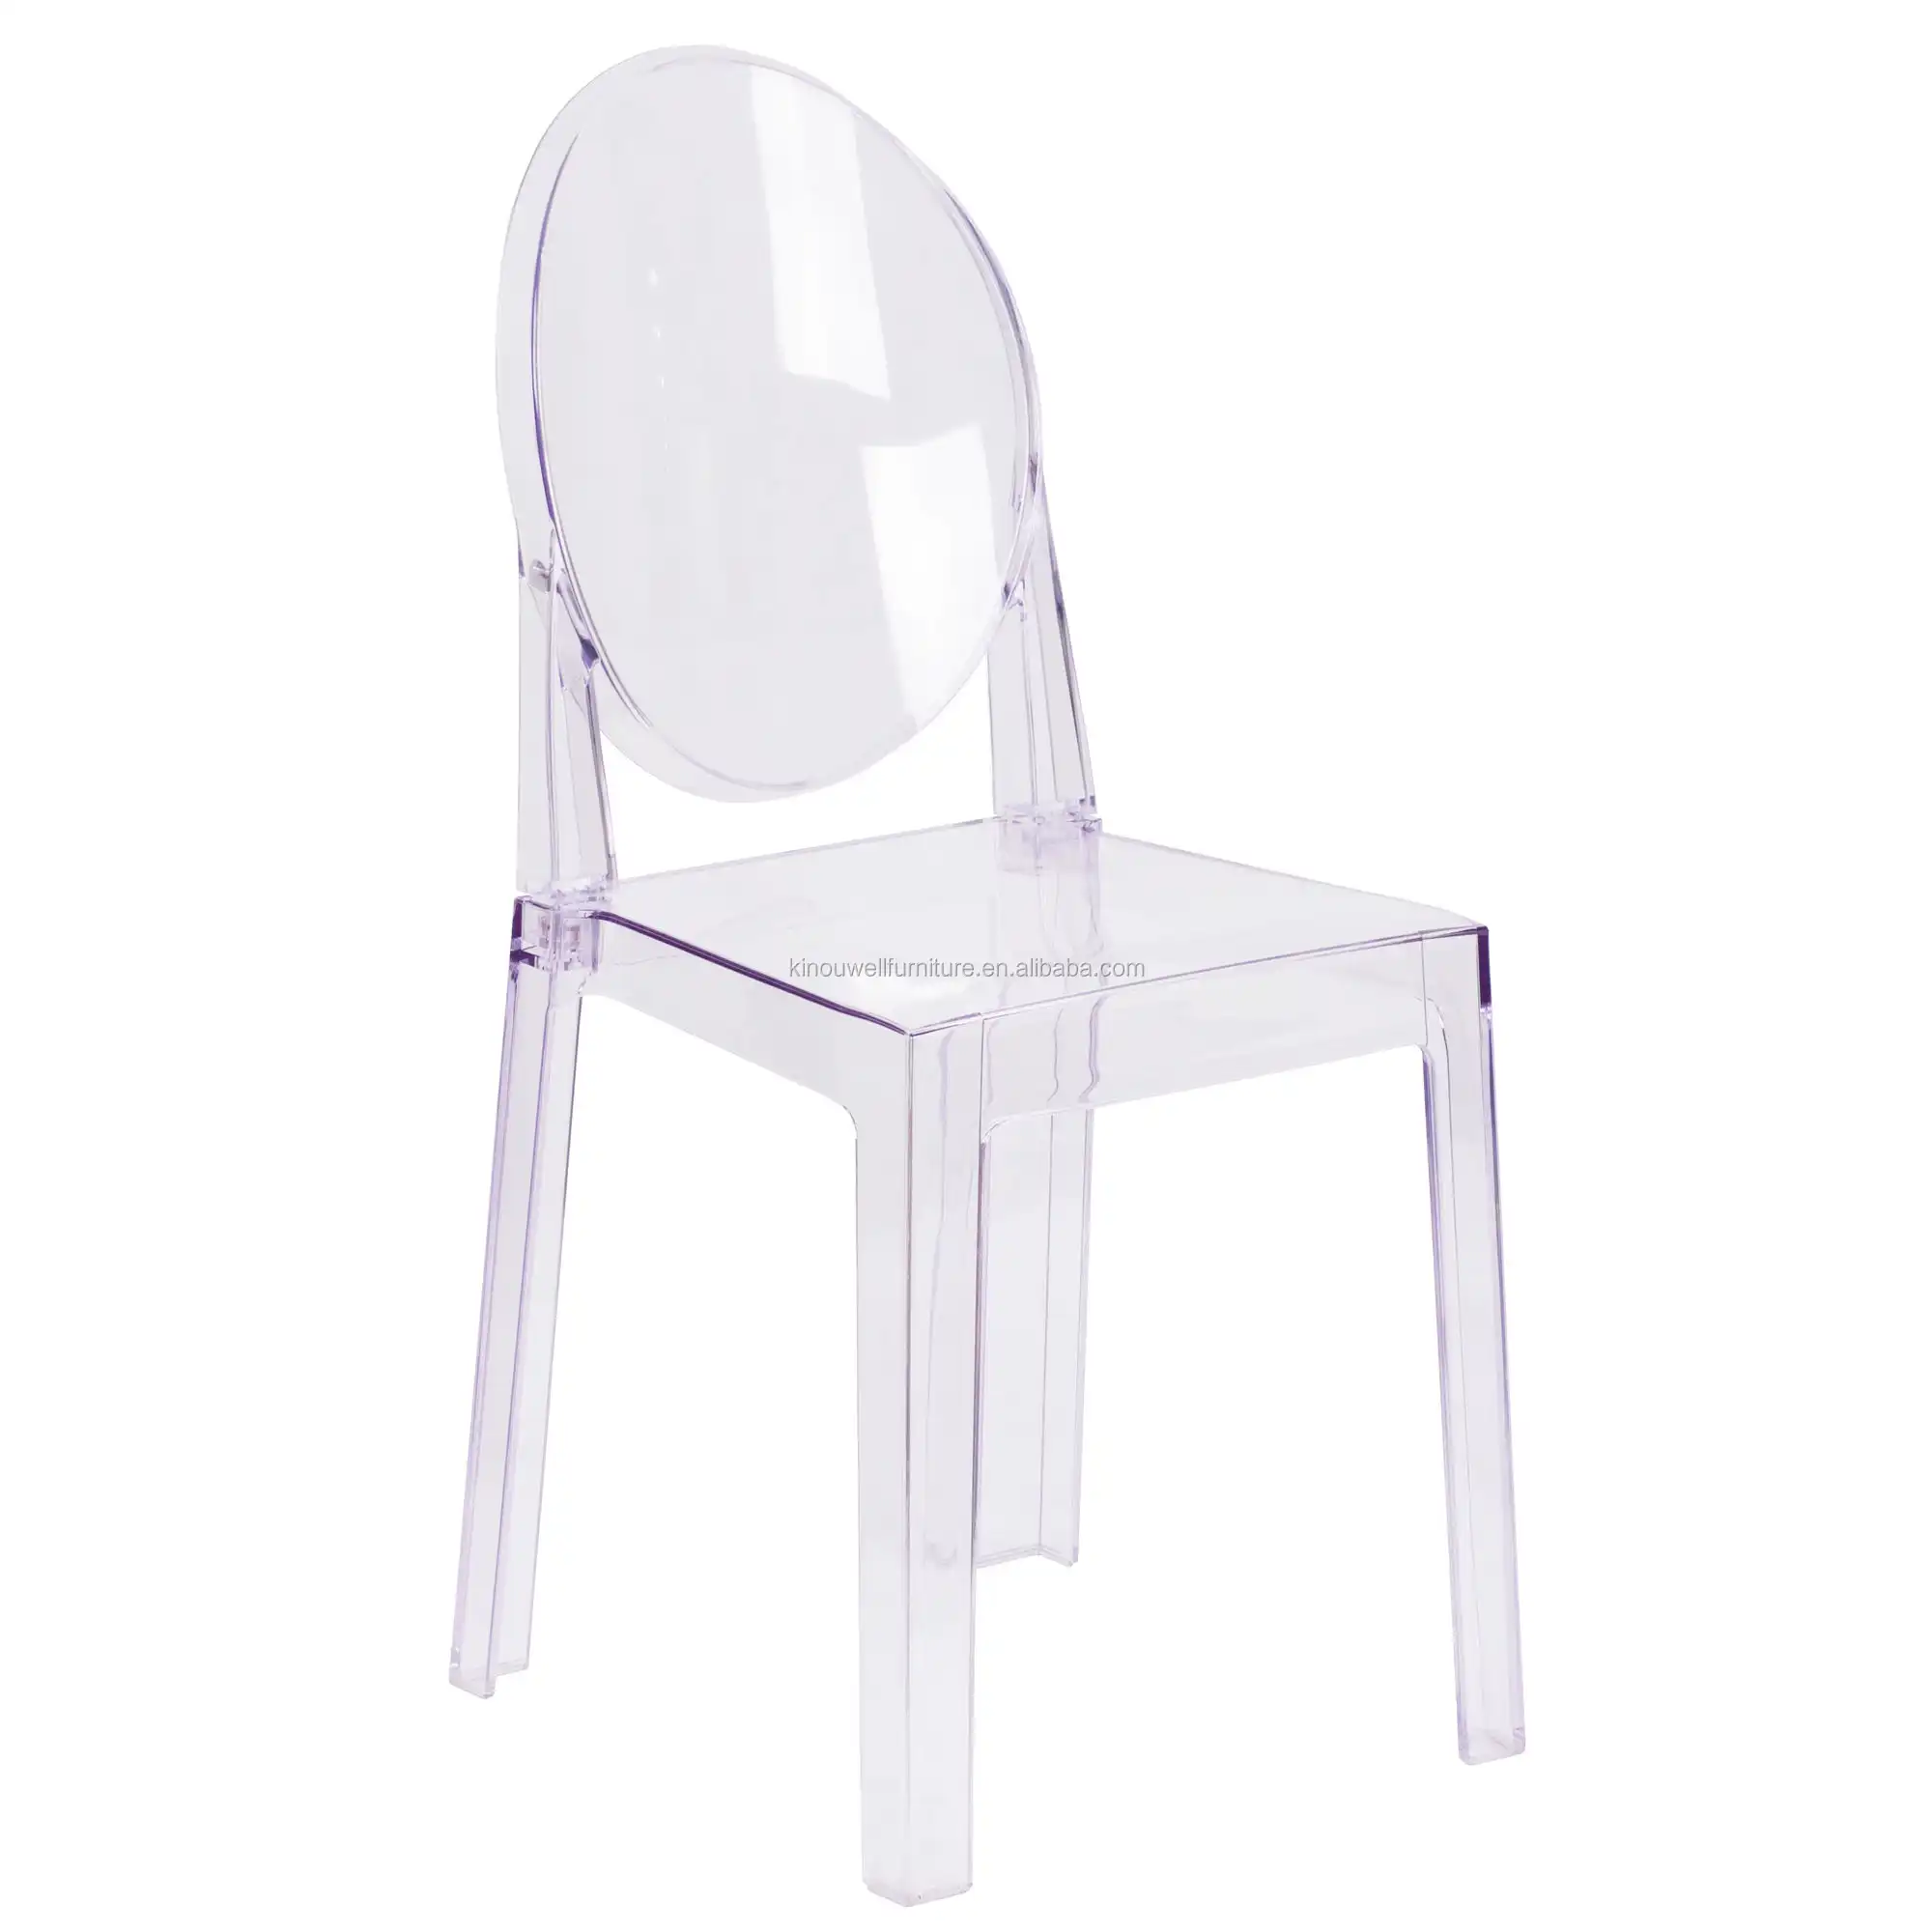 Kinouwell ghost chair hot sale white acrylic plastic wedding ghost dining chair dining room furniture modern no home furniture